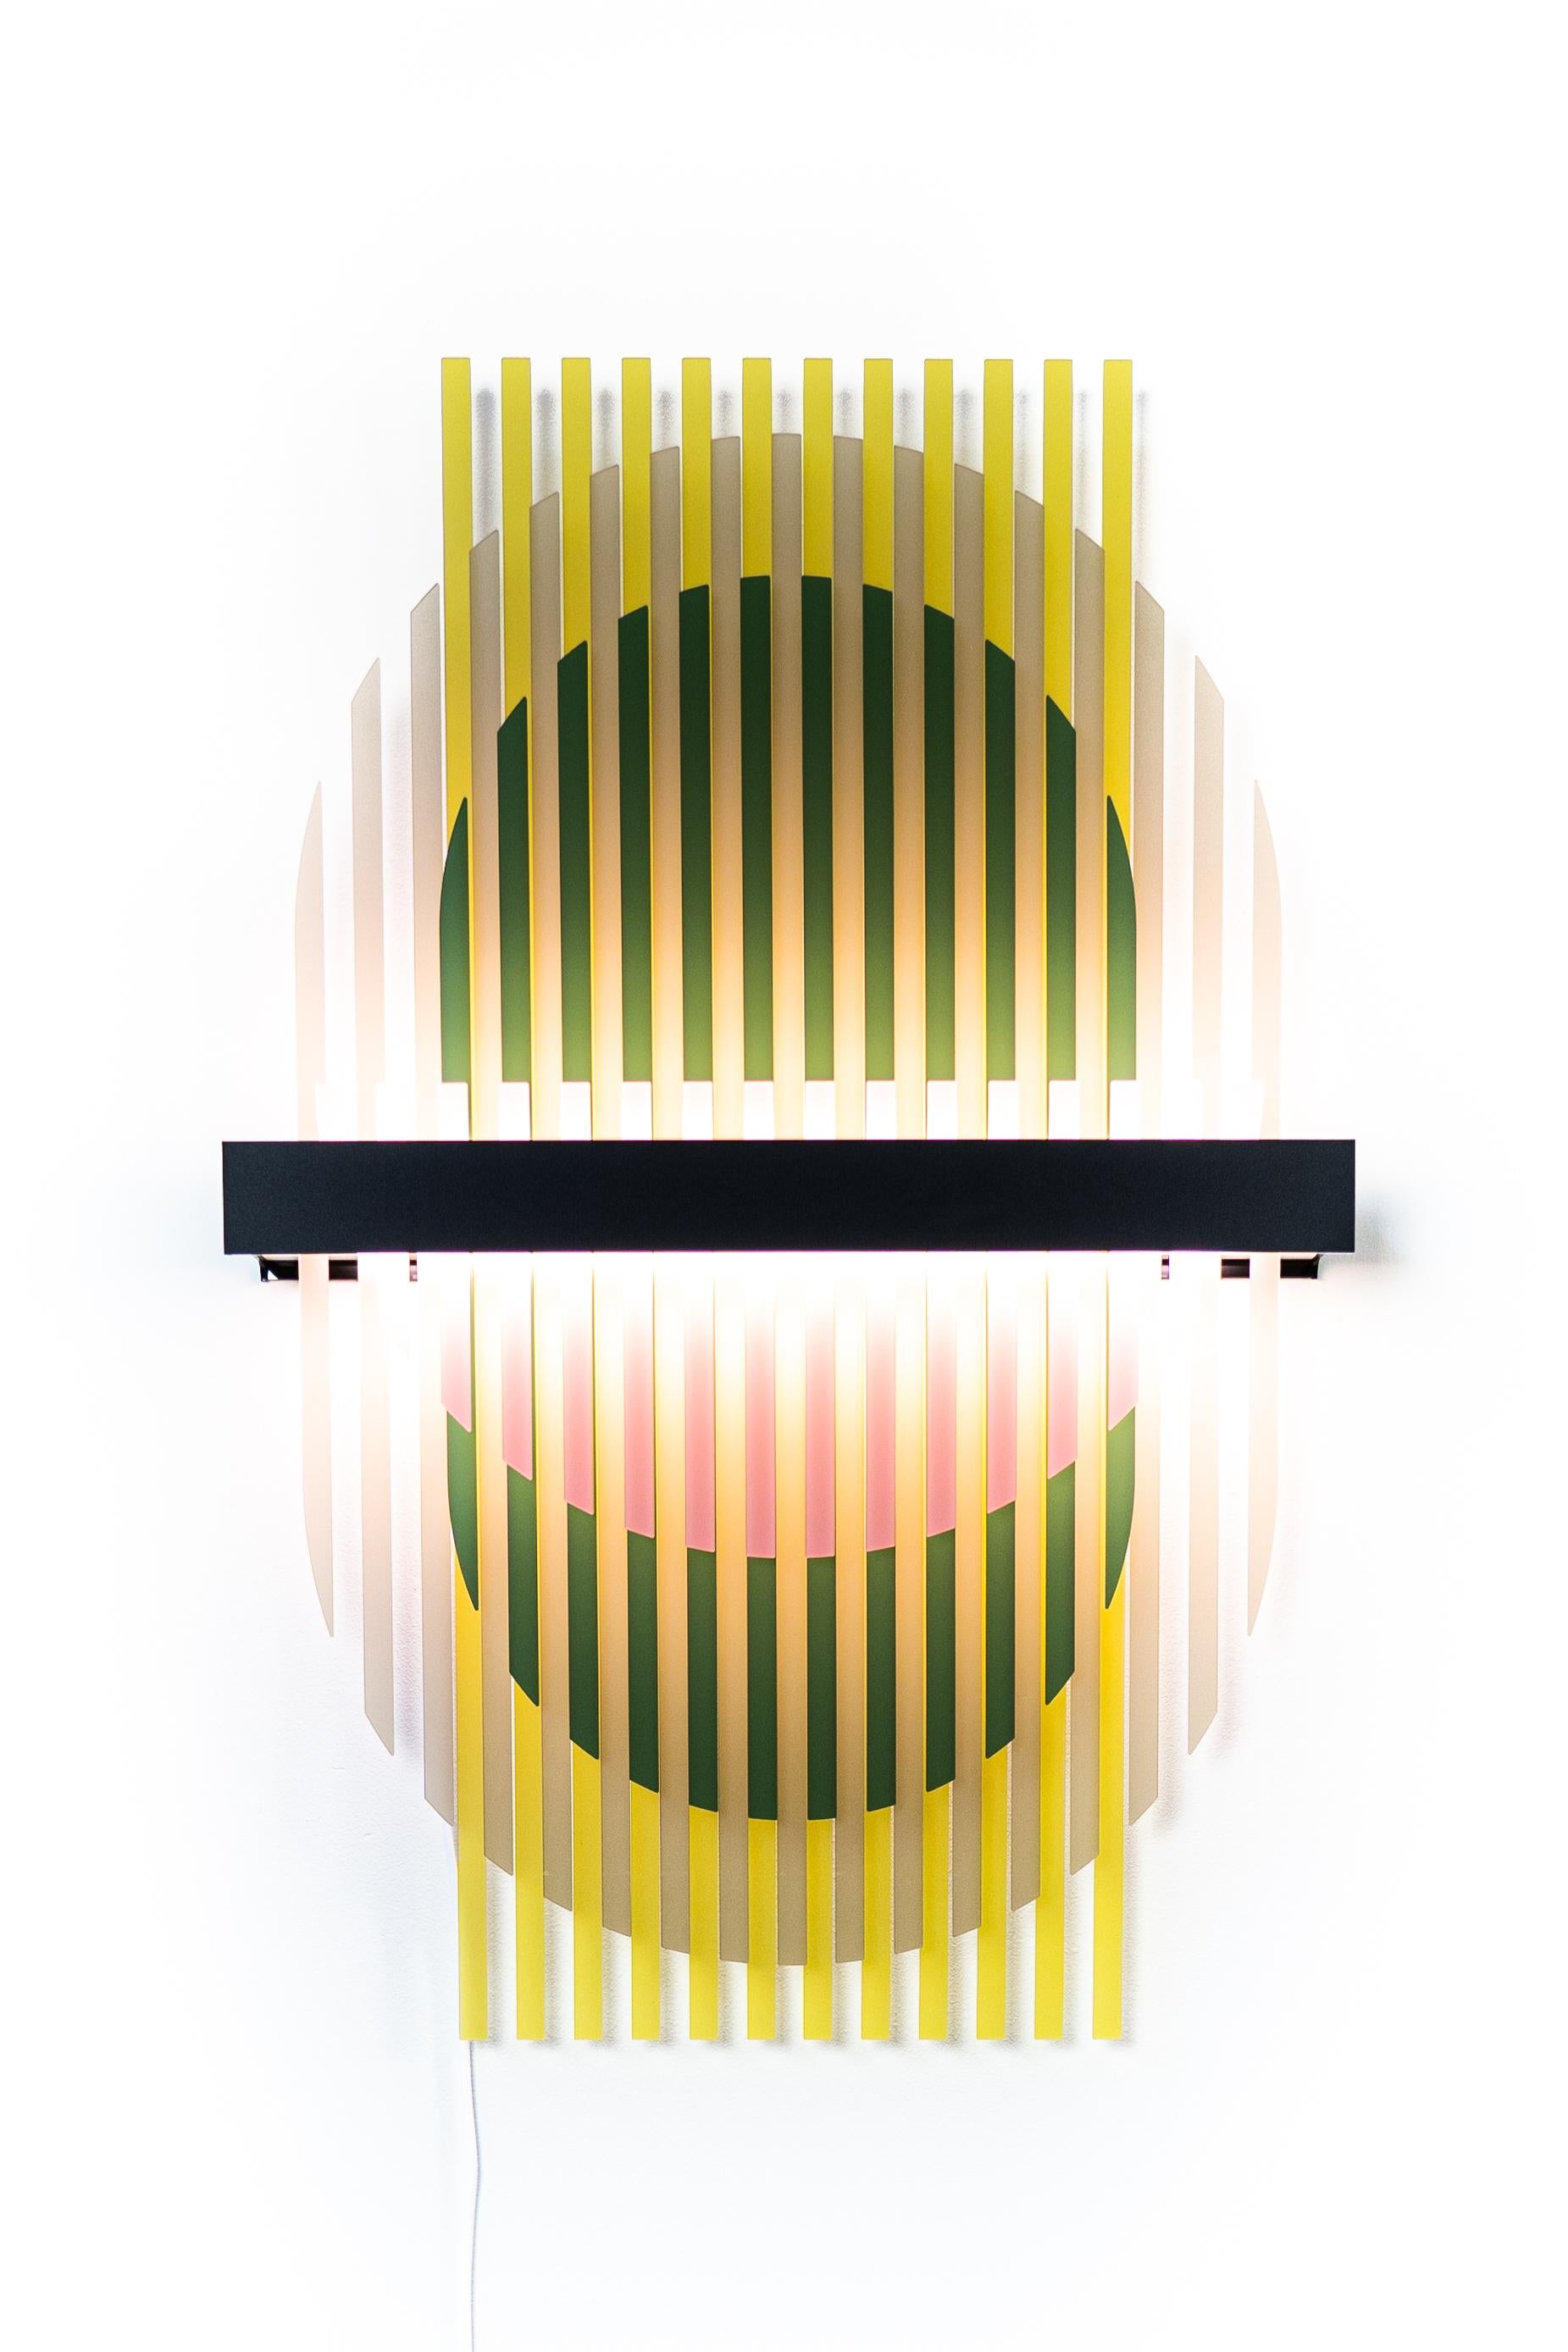 The new lamina light sculptures reveal a unique experience through distributing light between layered structures. The light sculpture creates fluctuating color patterns within its transparent slats. Various patterns are available for one light